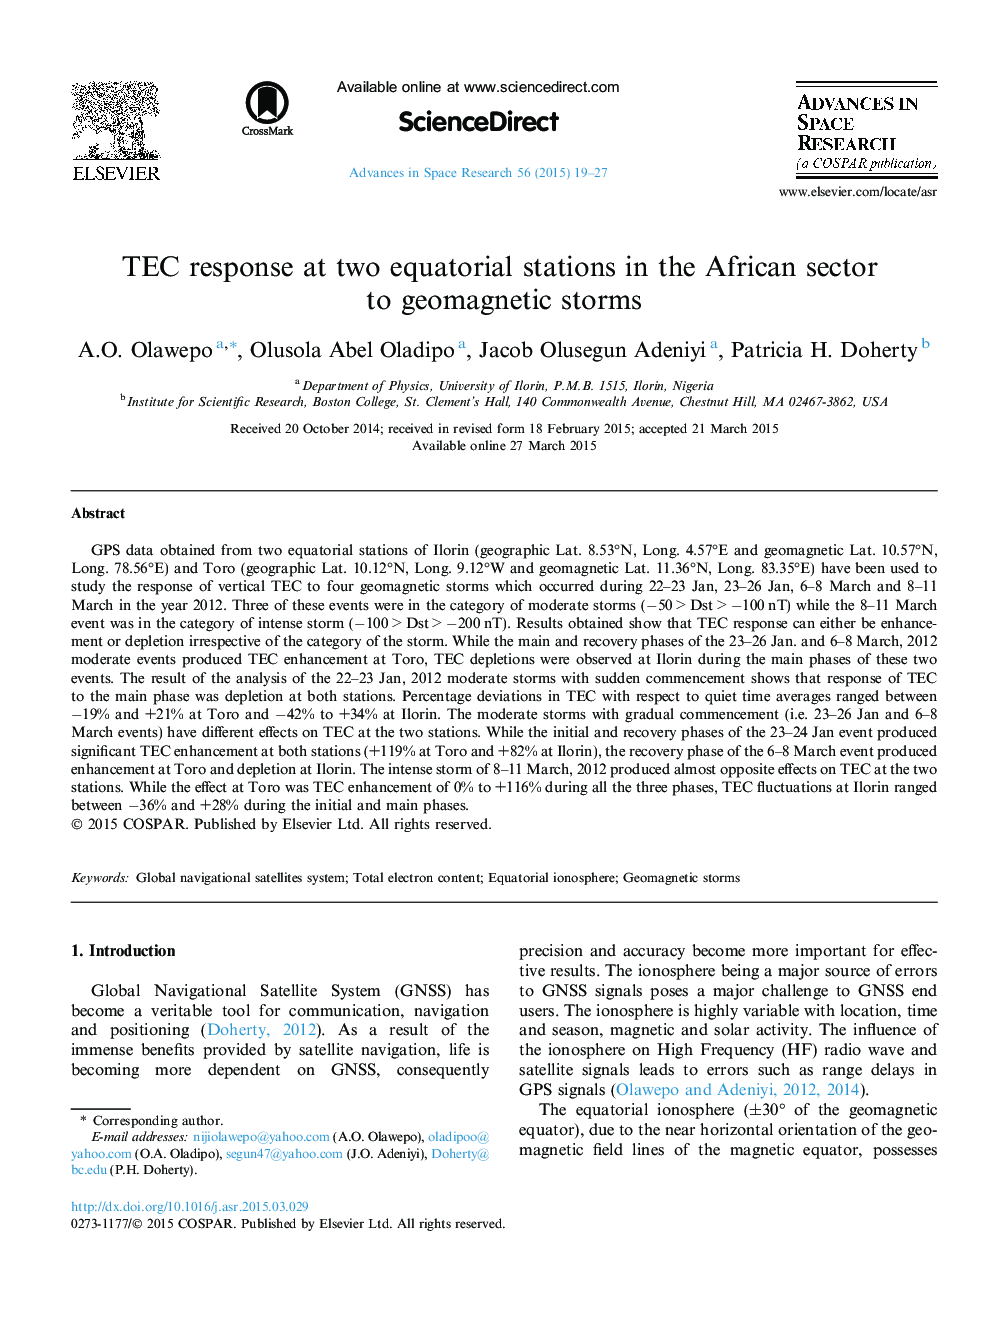 TEC response at two equatorial stations in the African sector to geomagnetic storms